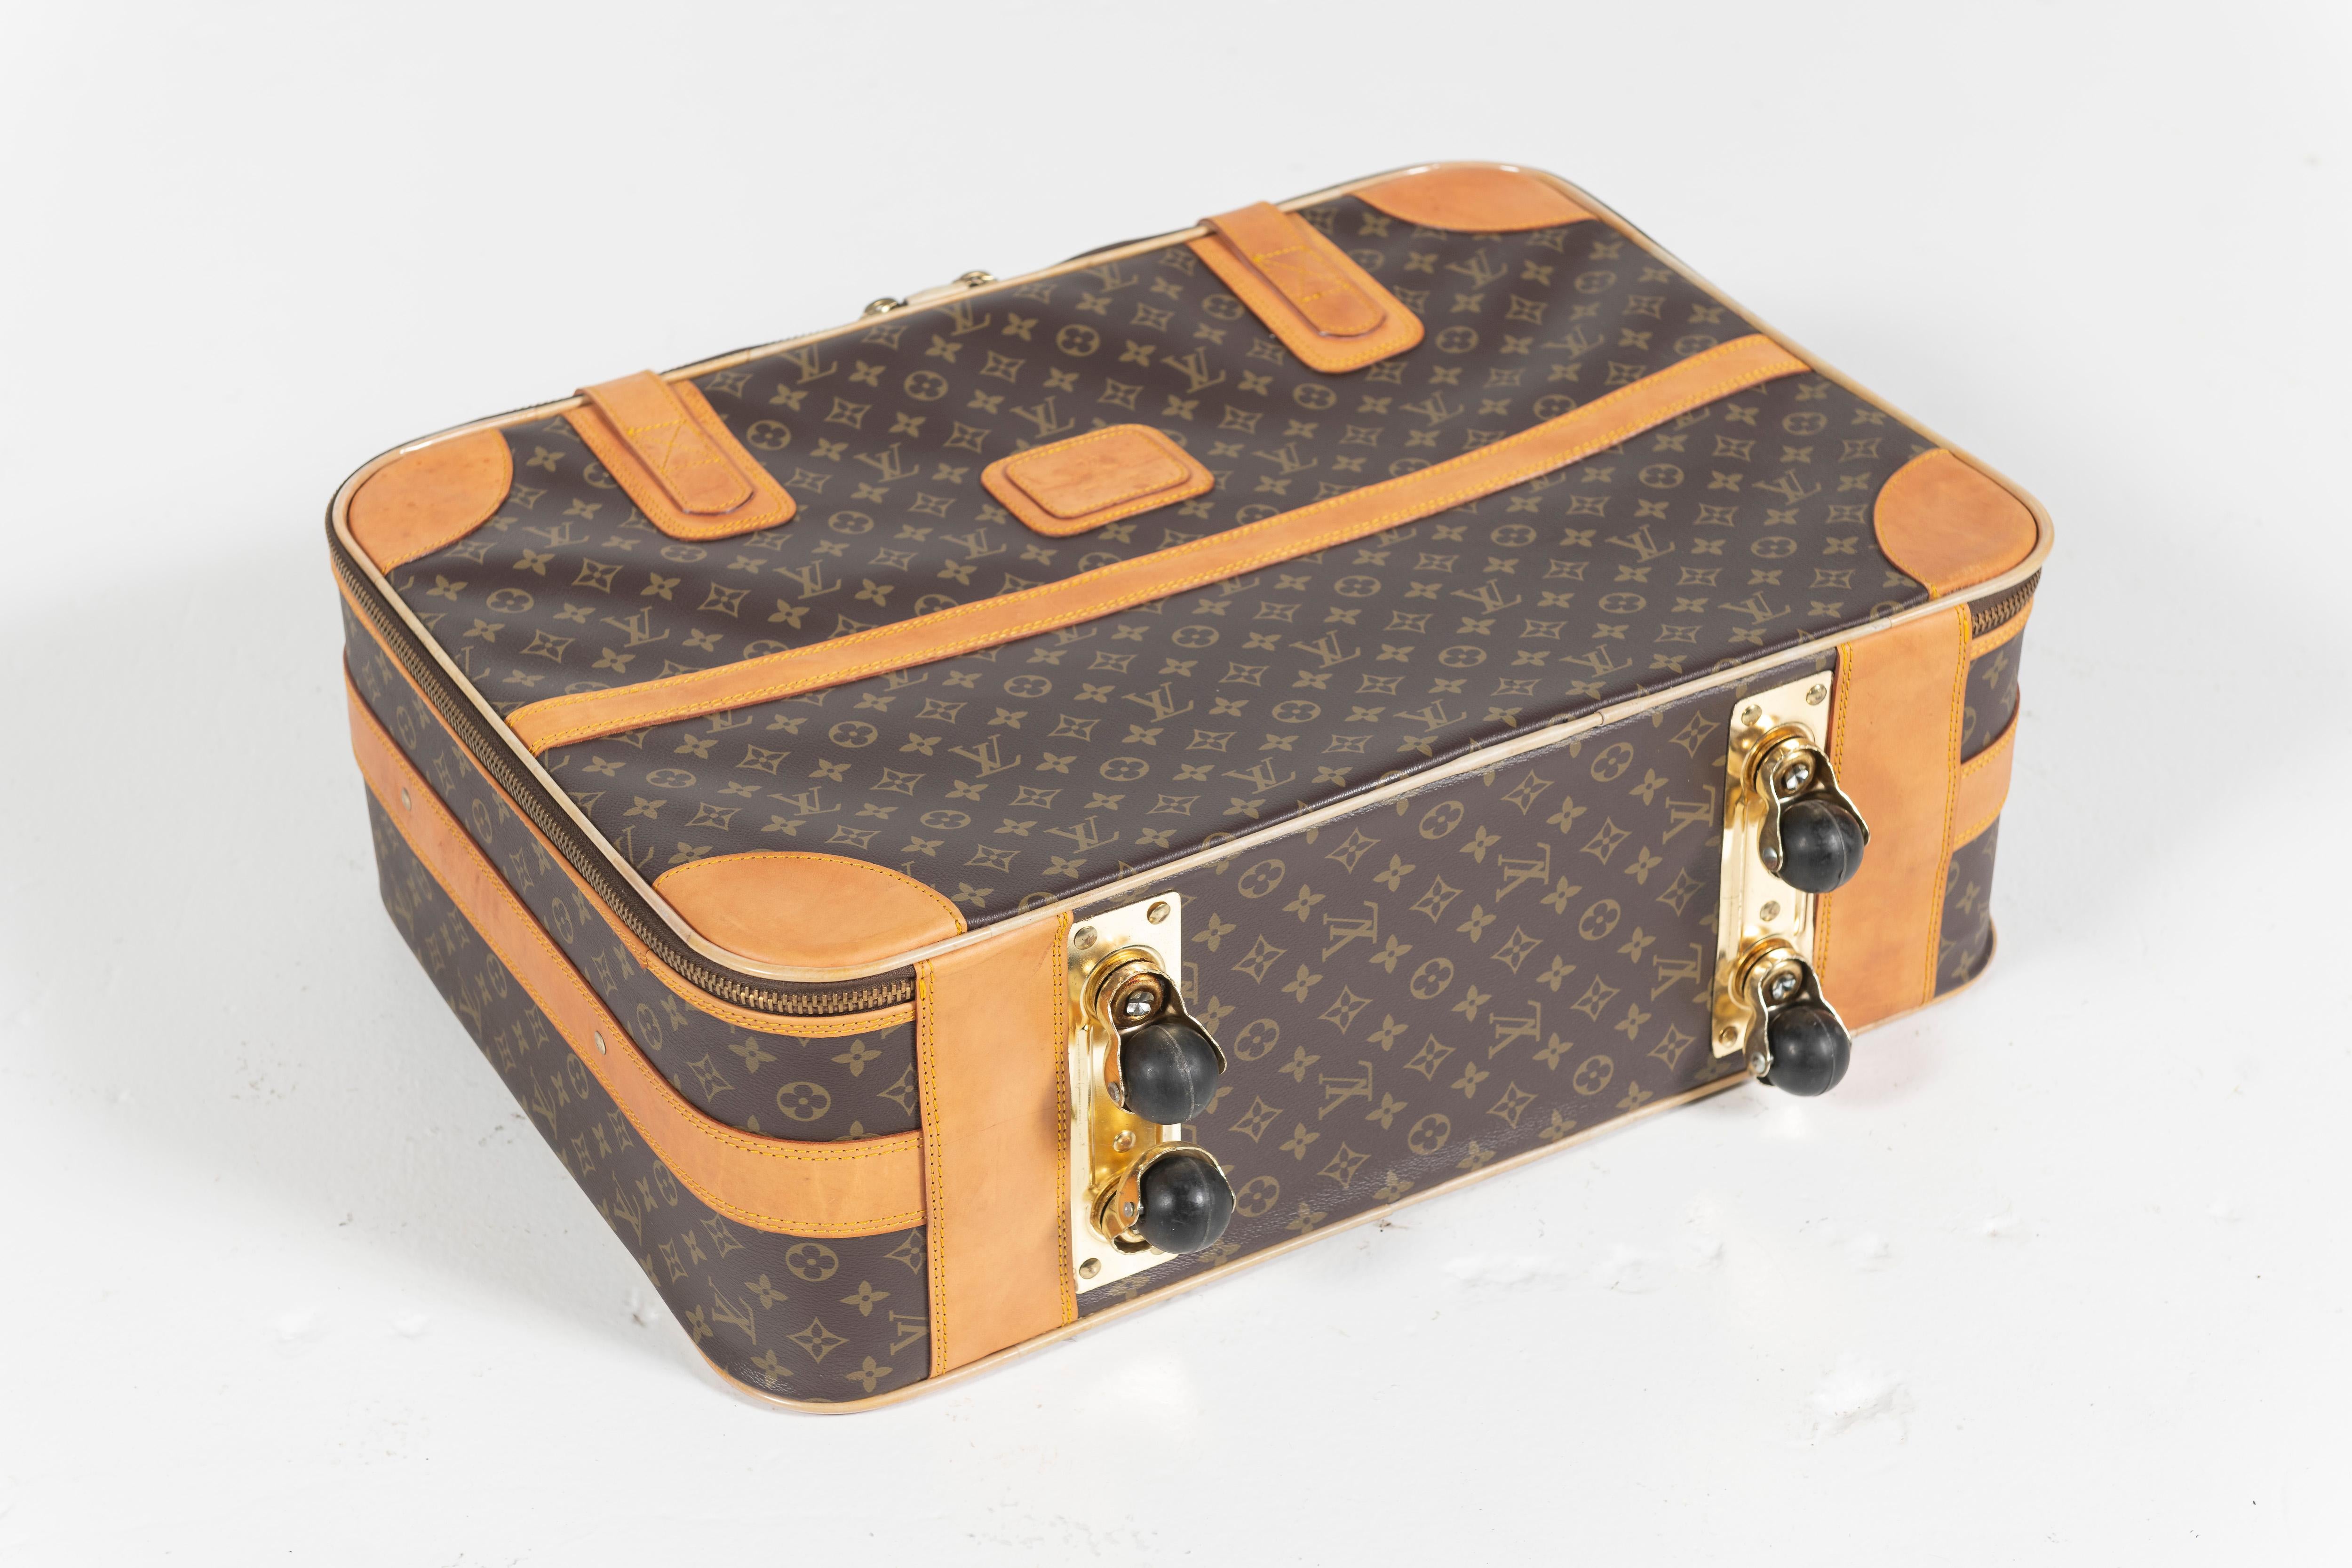 Vintage Louis Vuitton Suitcase, Monogrammed Coated Canvas, Small-Sized In Good Condition For Sale In San Francisco, CA